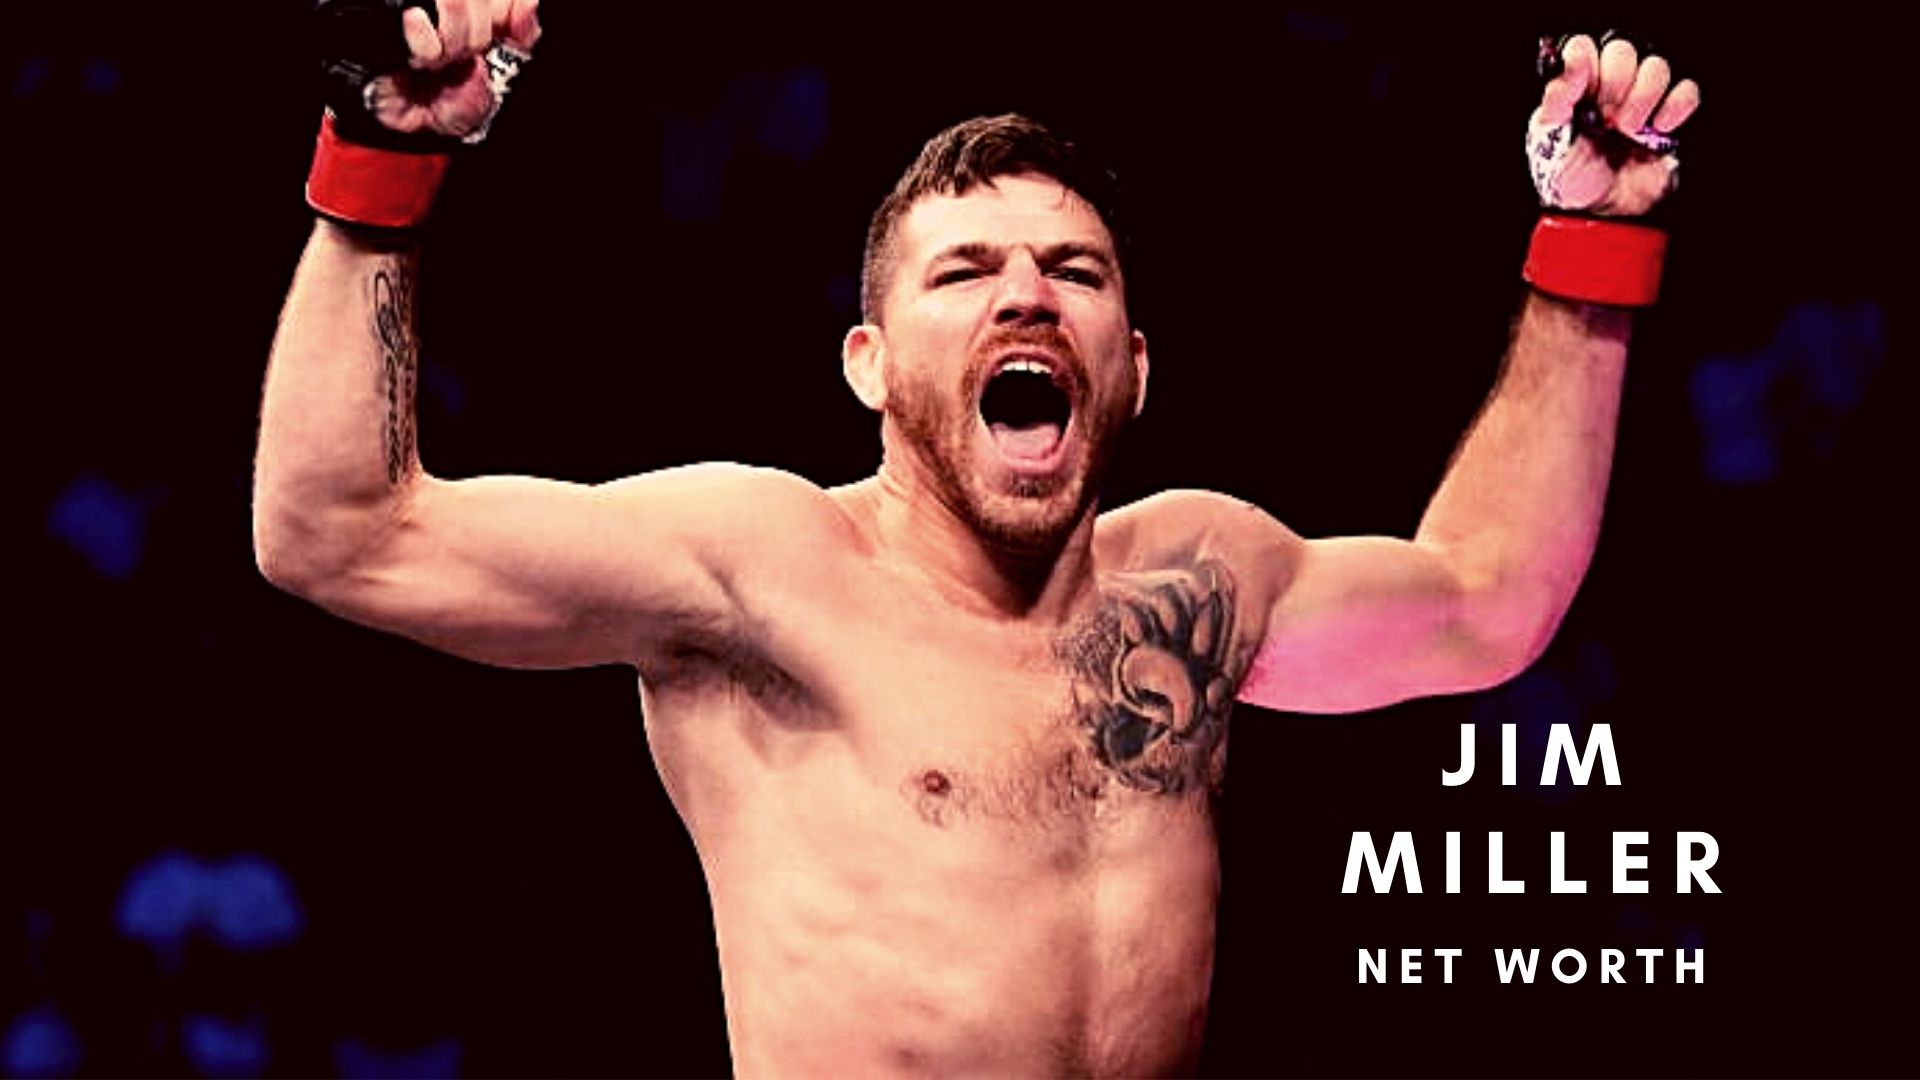 Jim Miller 2021 Net Worth, Salary, Records, and Endorsements